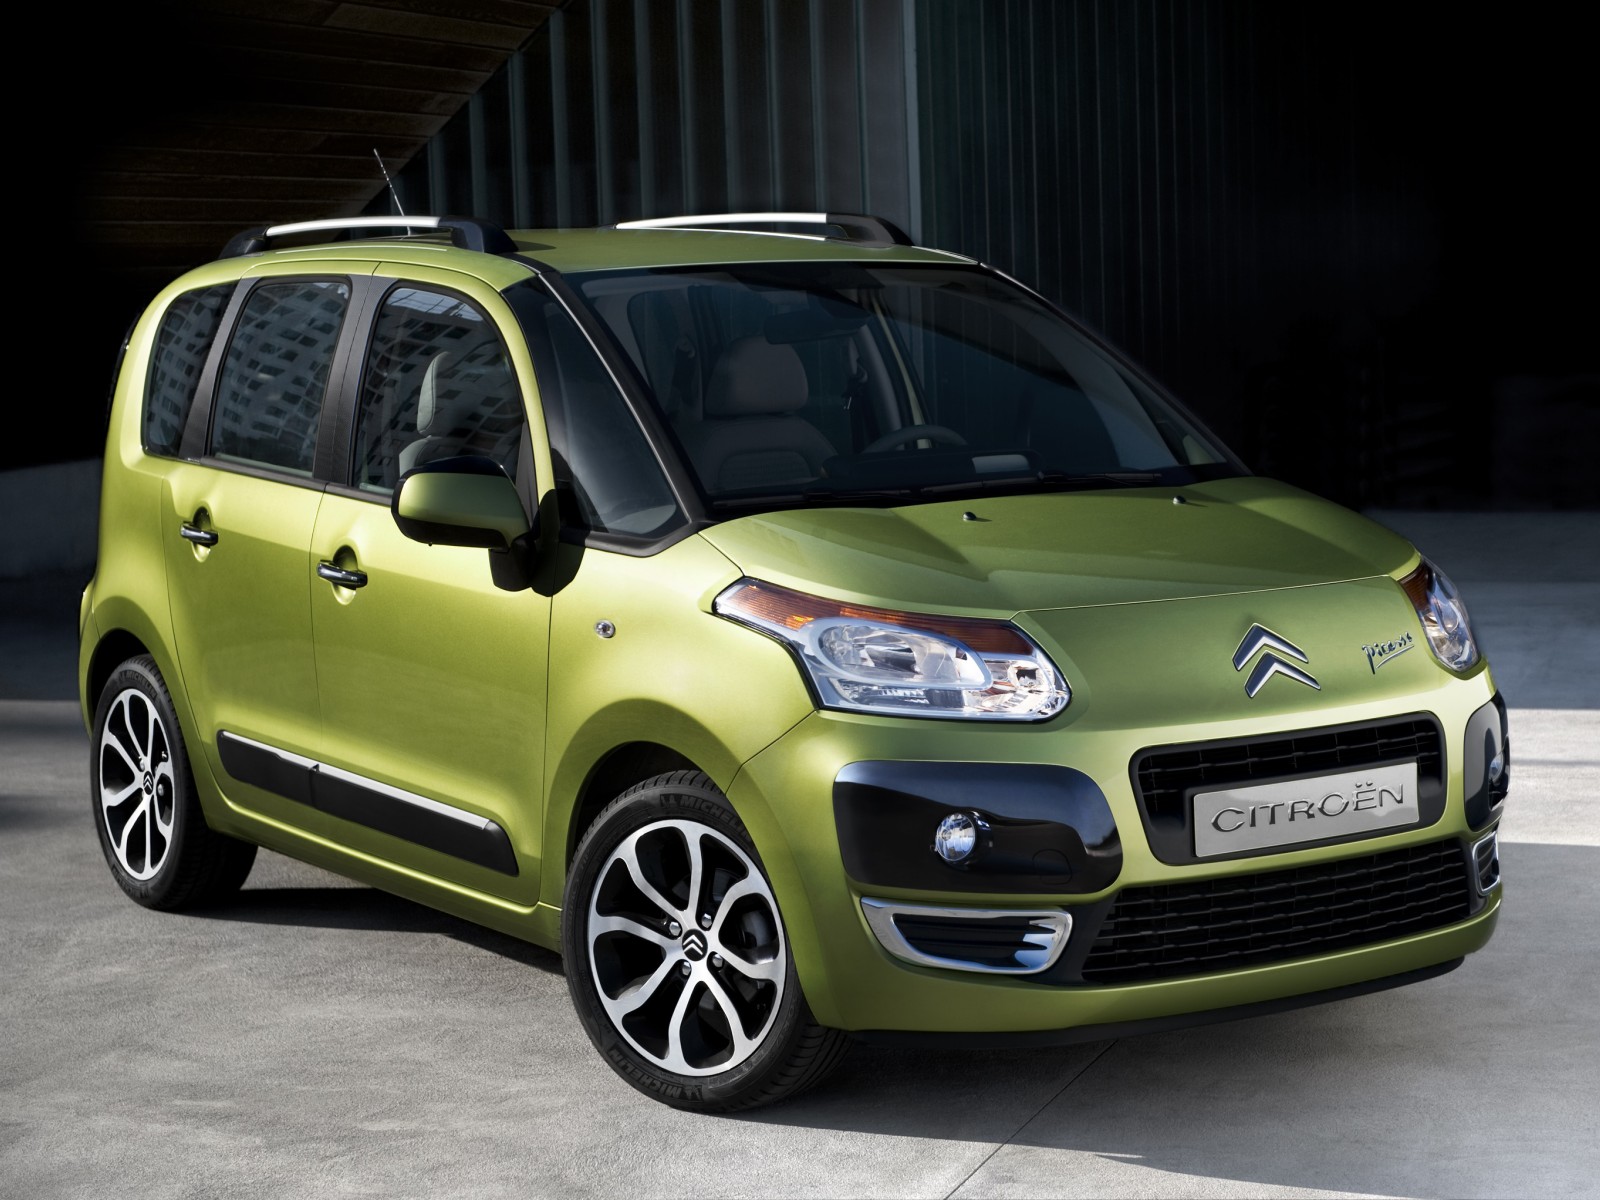 HD Wallpapers  2009 Citroen C3 Picasso  Wallpapers 